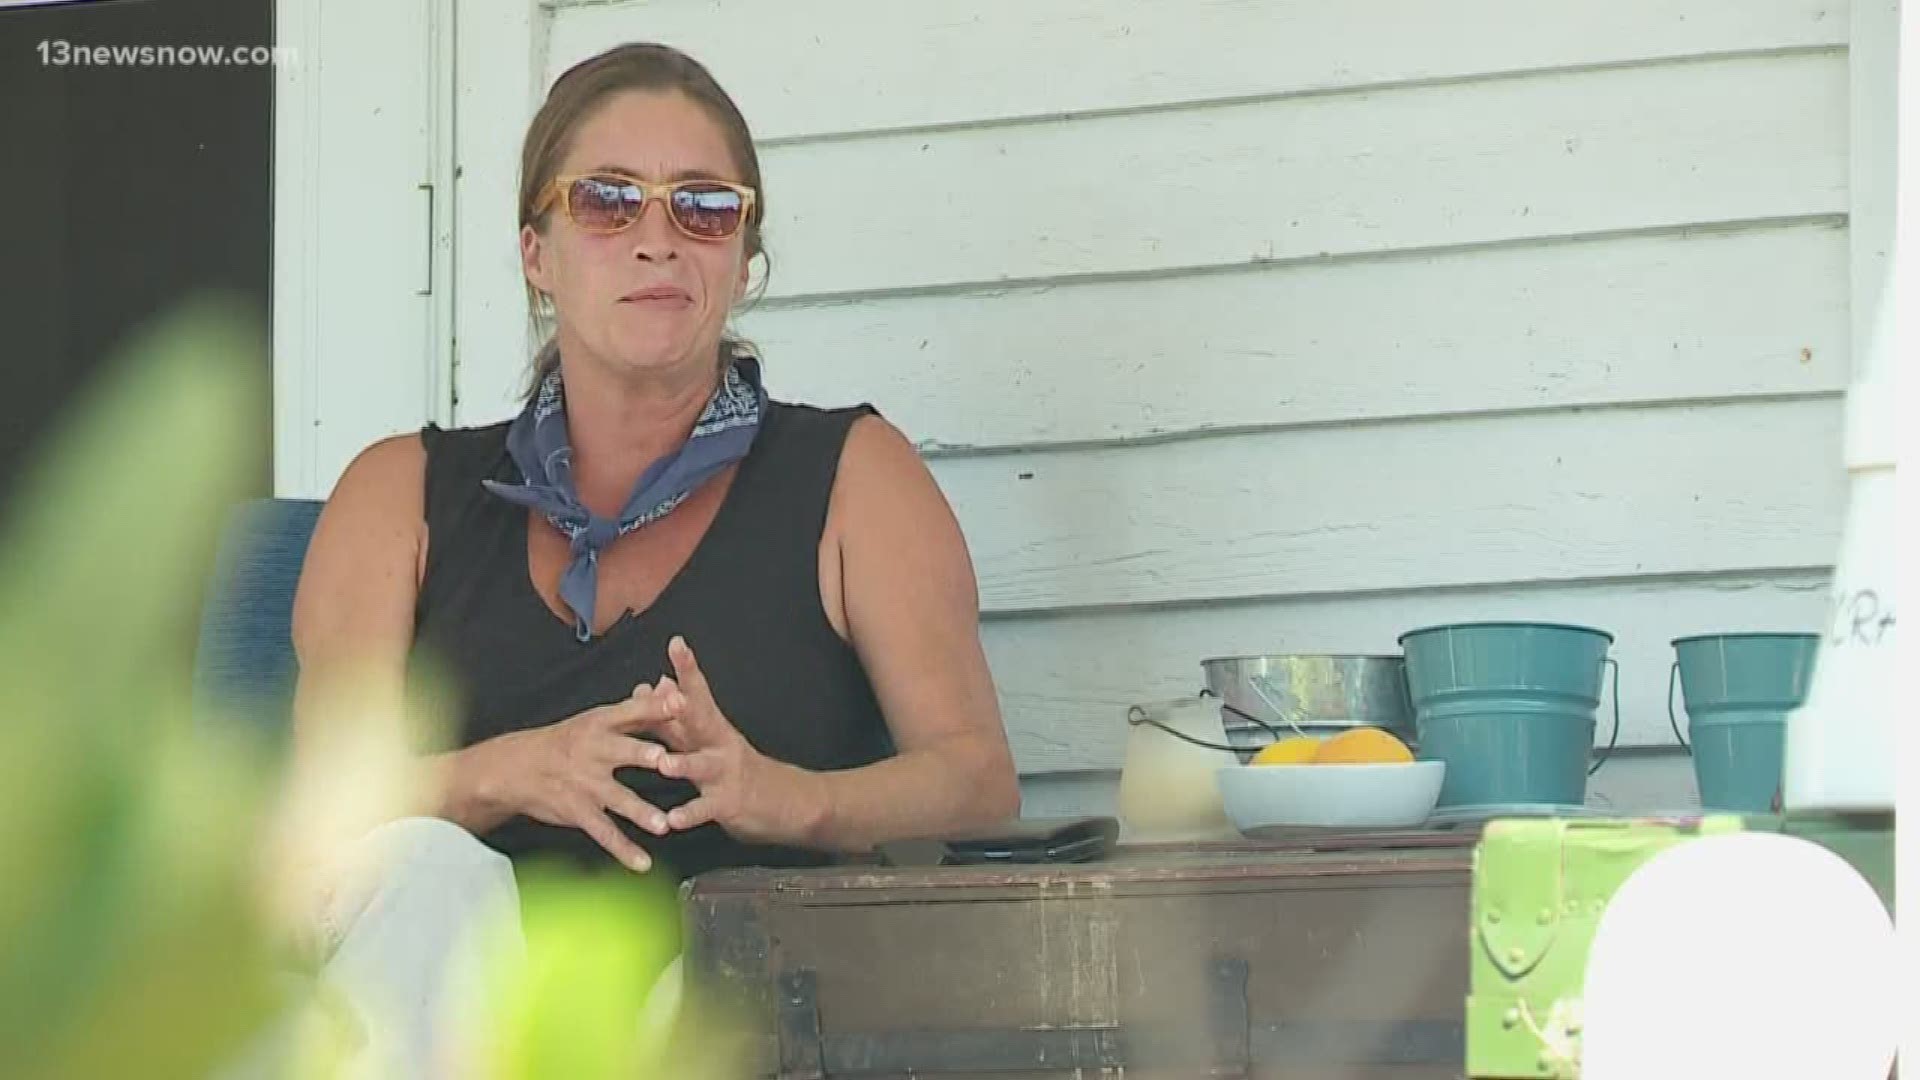 After two requests by Governor Roy Cooper, FEMA assistance is still pending. Residents in Ocracoke said that it will be impossible to re-build without the help.